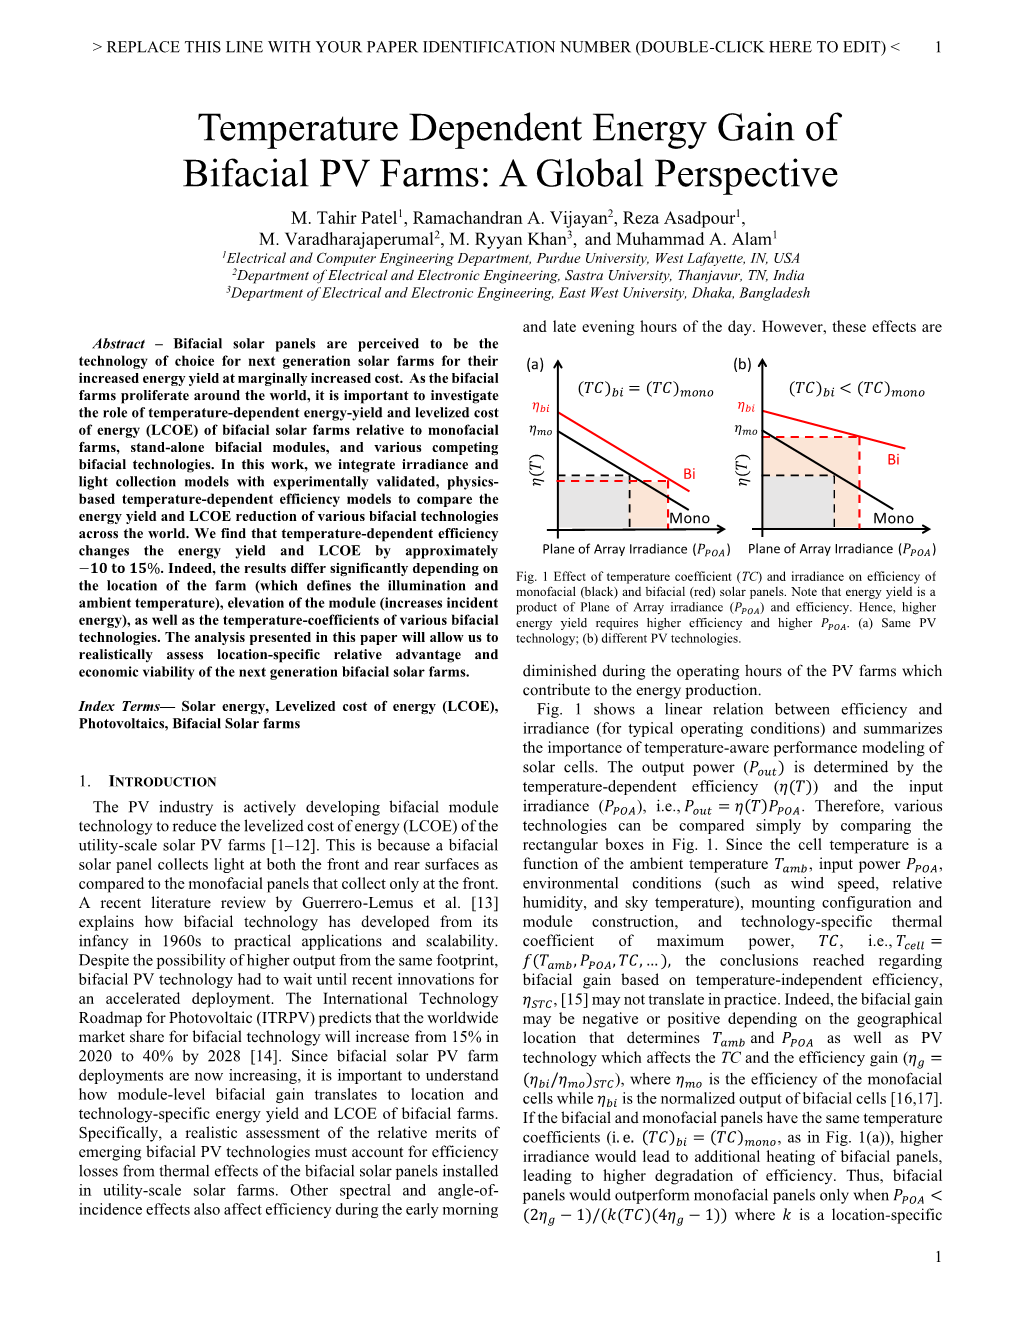 Temperature Dependent Energy Gain of Bifacial PV Farms: a Global Perspective M